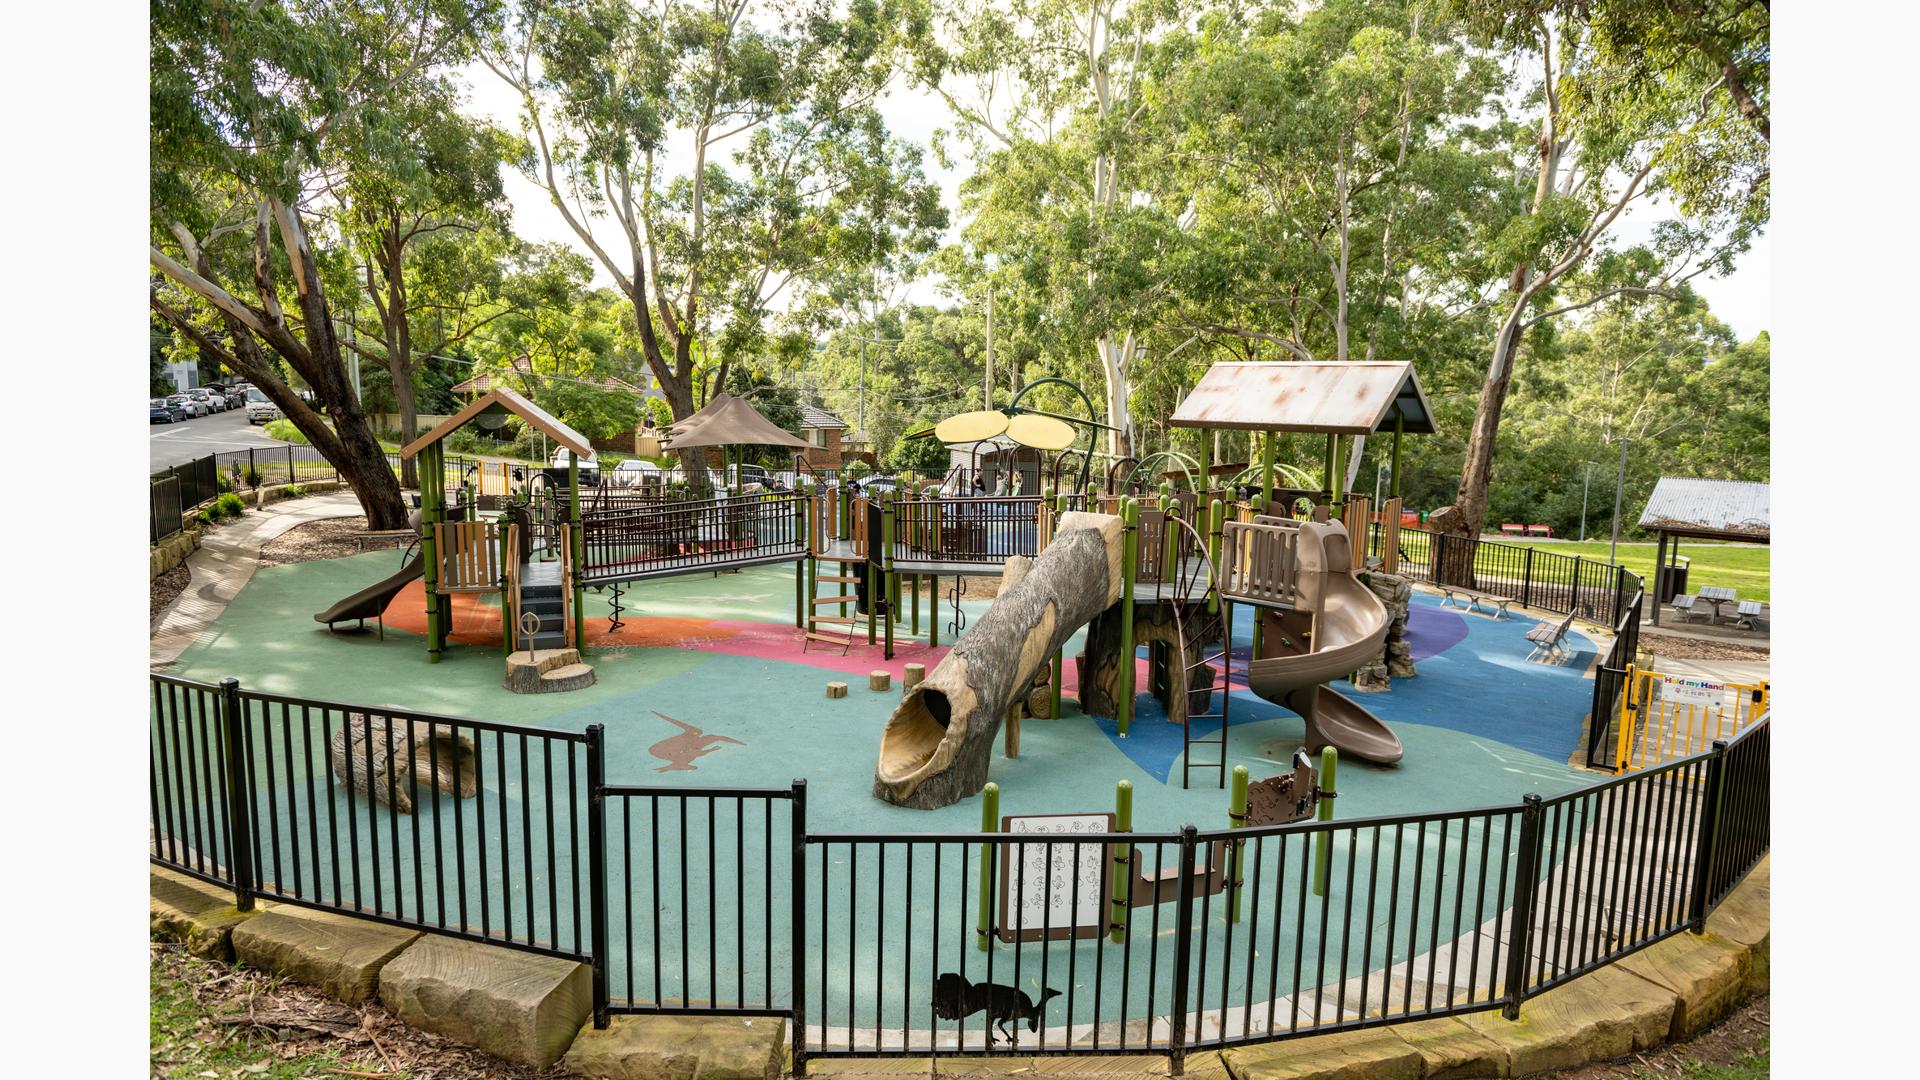 Mindarie Park located in Ryde, Australia, delivers a unique playground experience for children of all abilities. The nature-inspired PlayBooster® play structure is packed with natural looking equipment.